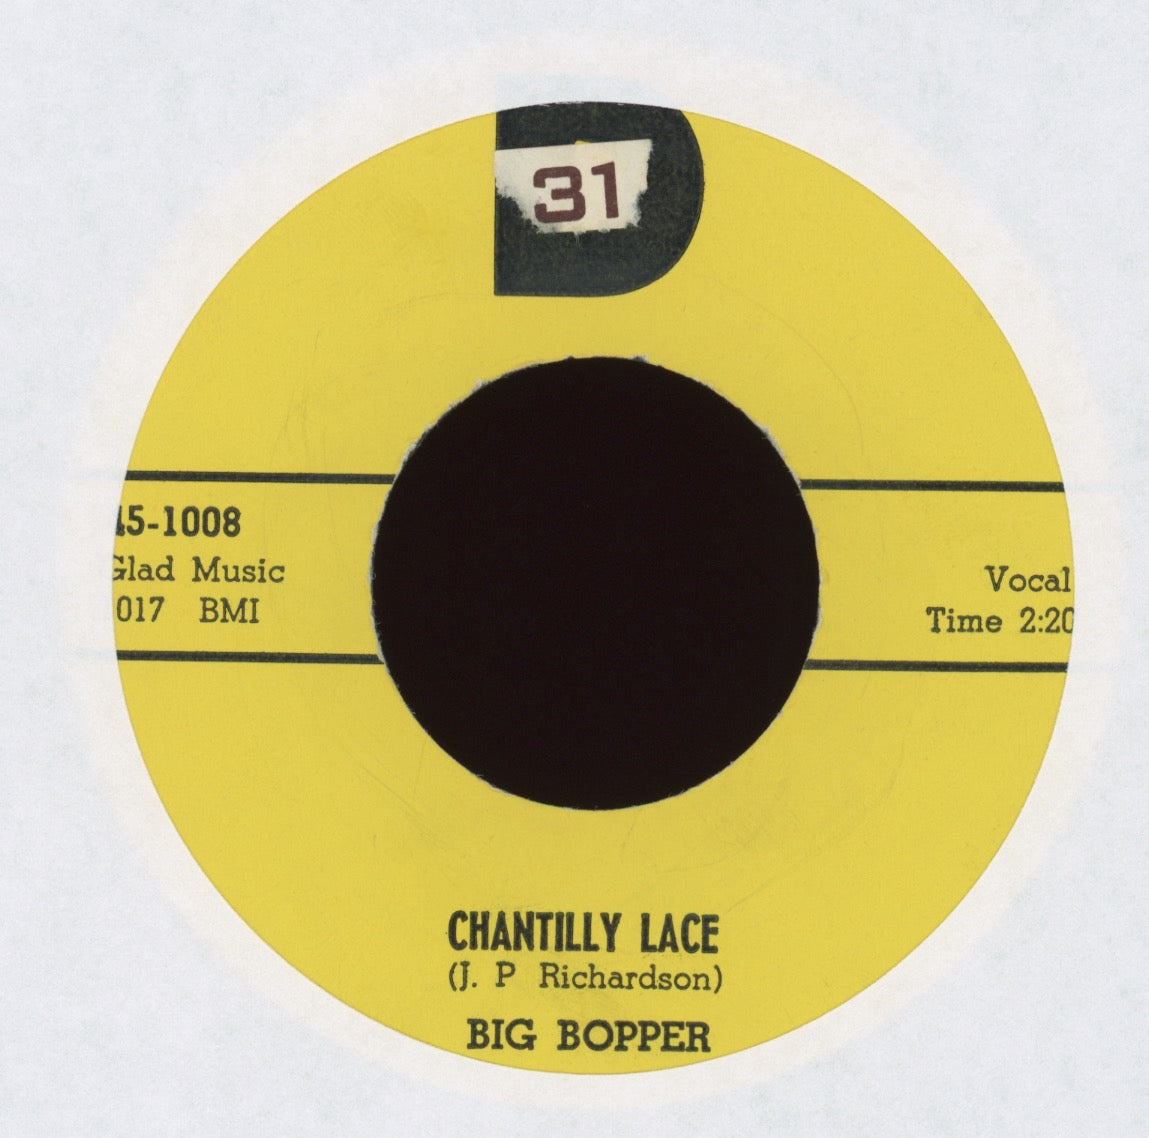 Big Bopper - Chantilly Lace on D First Press